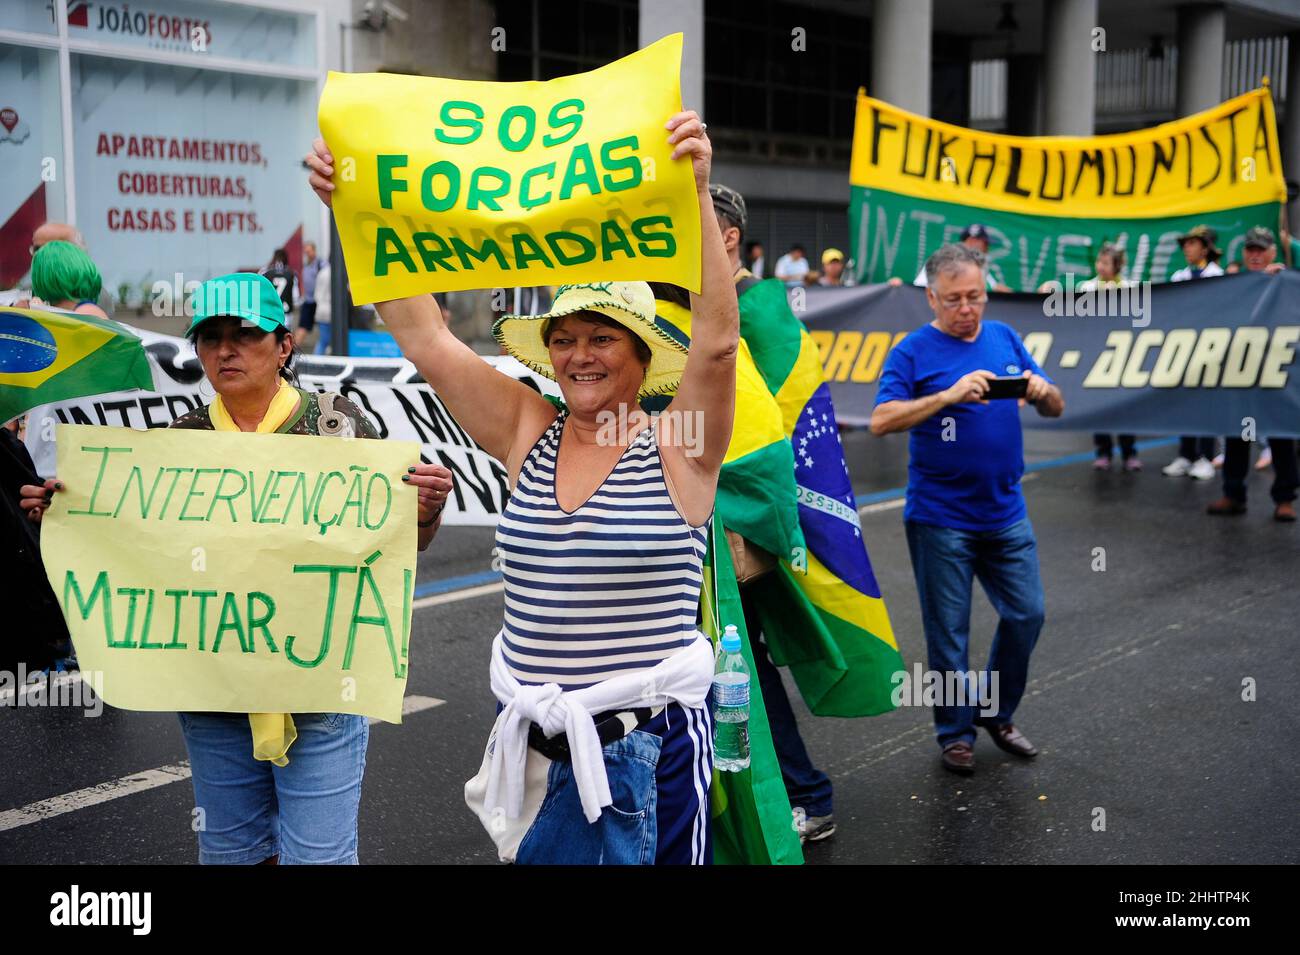 Brazilian people protest in favor of military intervention dictatorship government  on Independence Day, marching on street Stock Photo